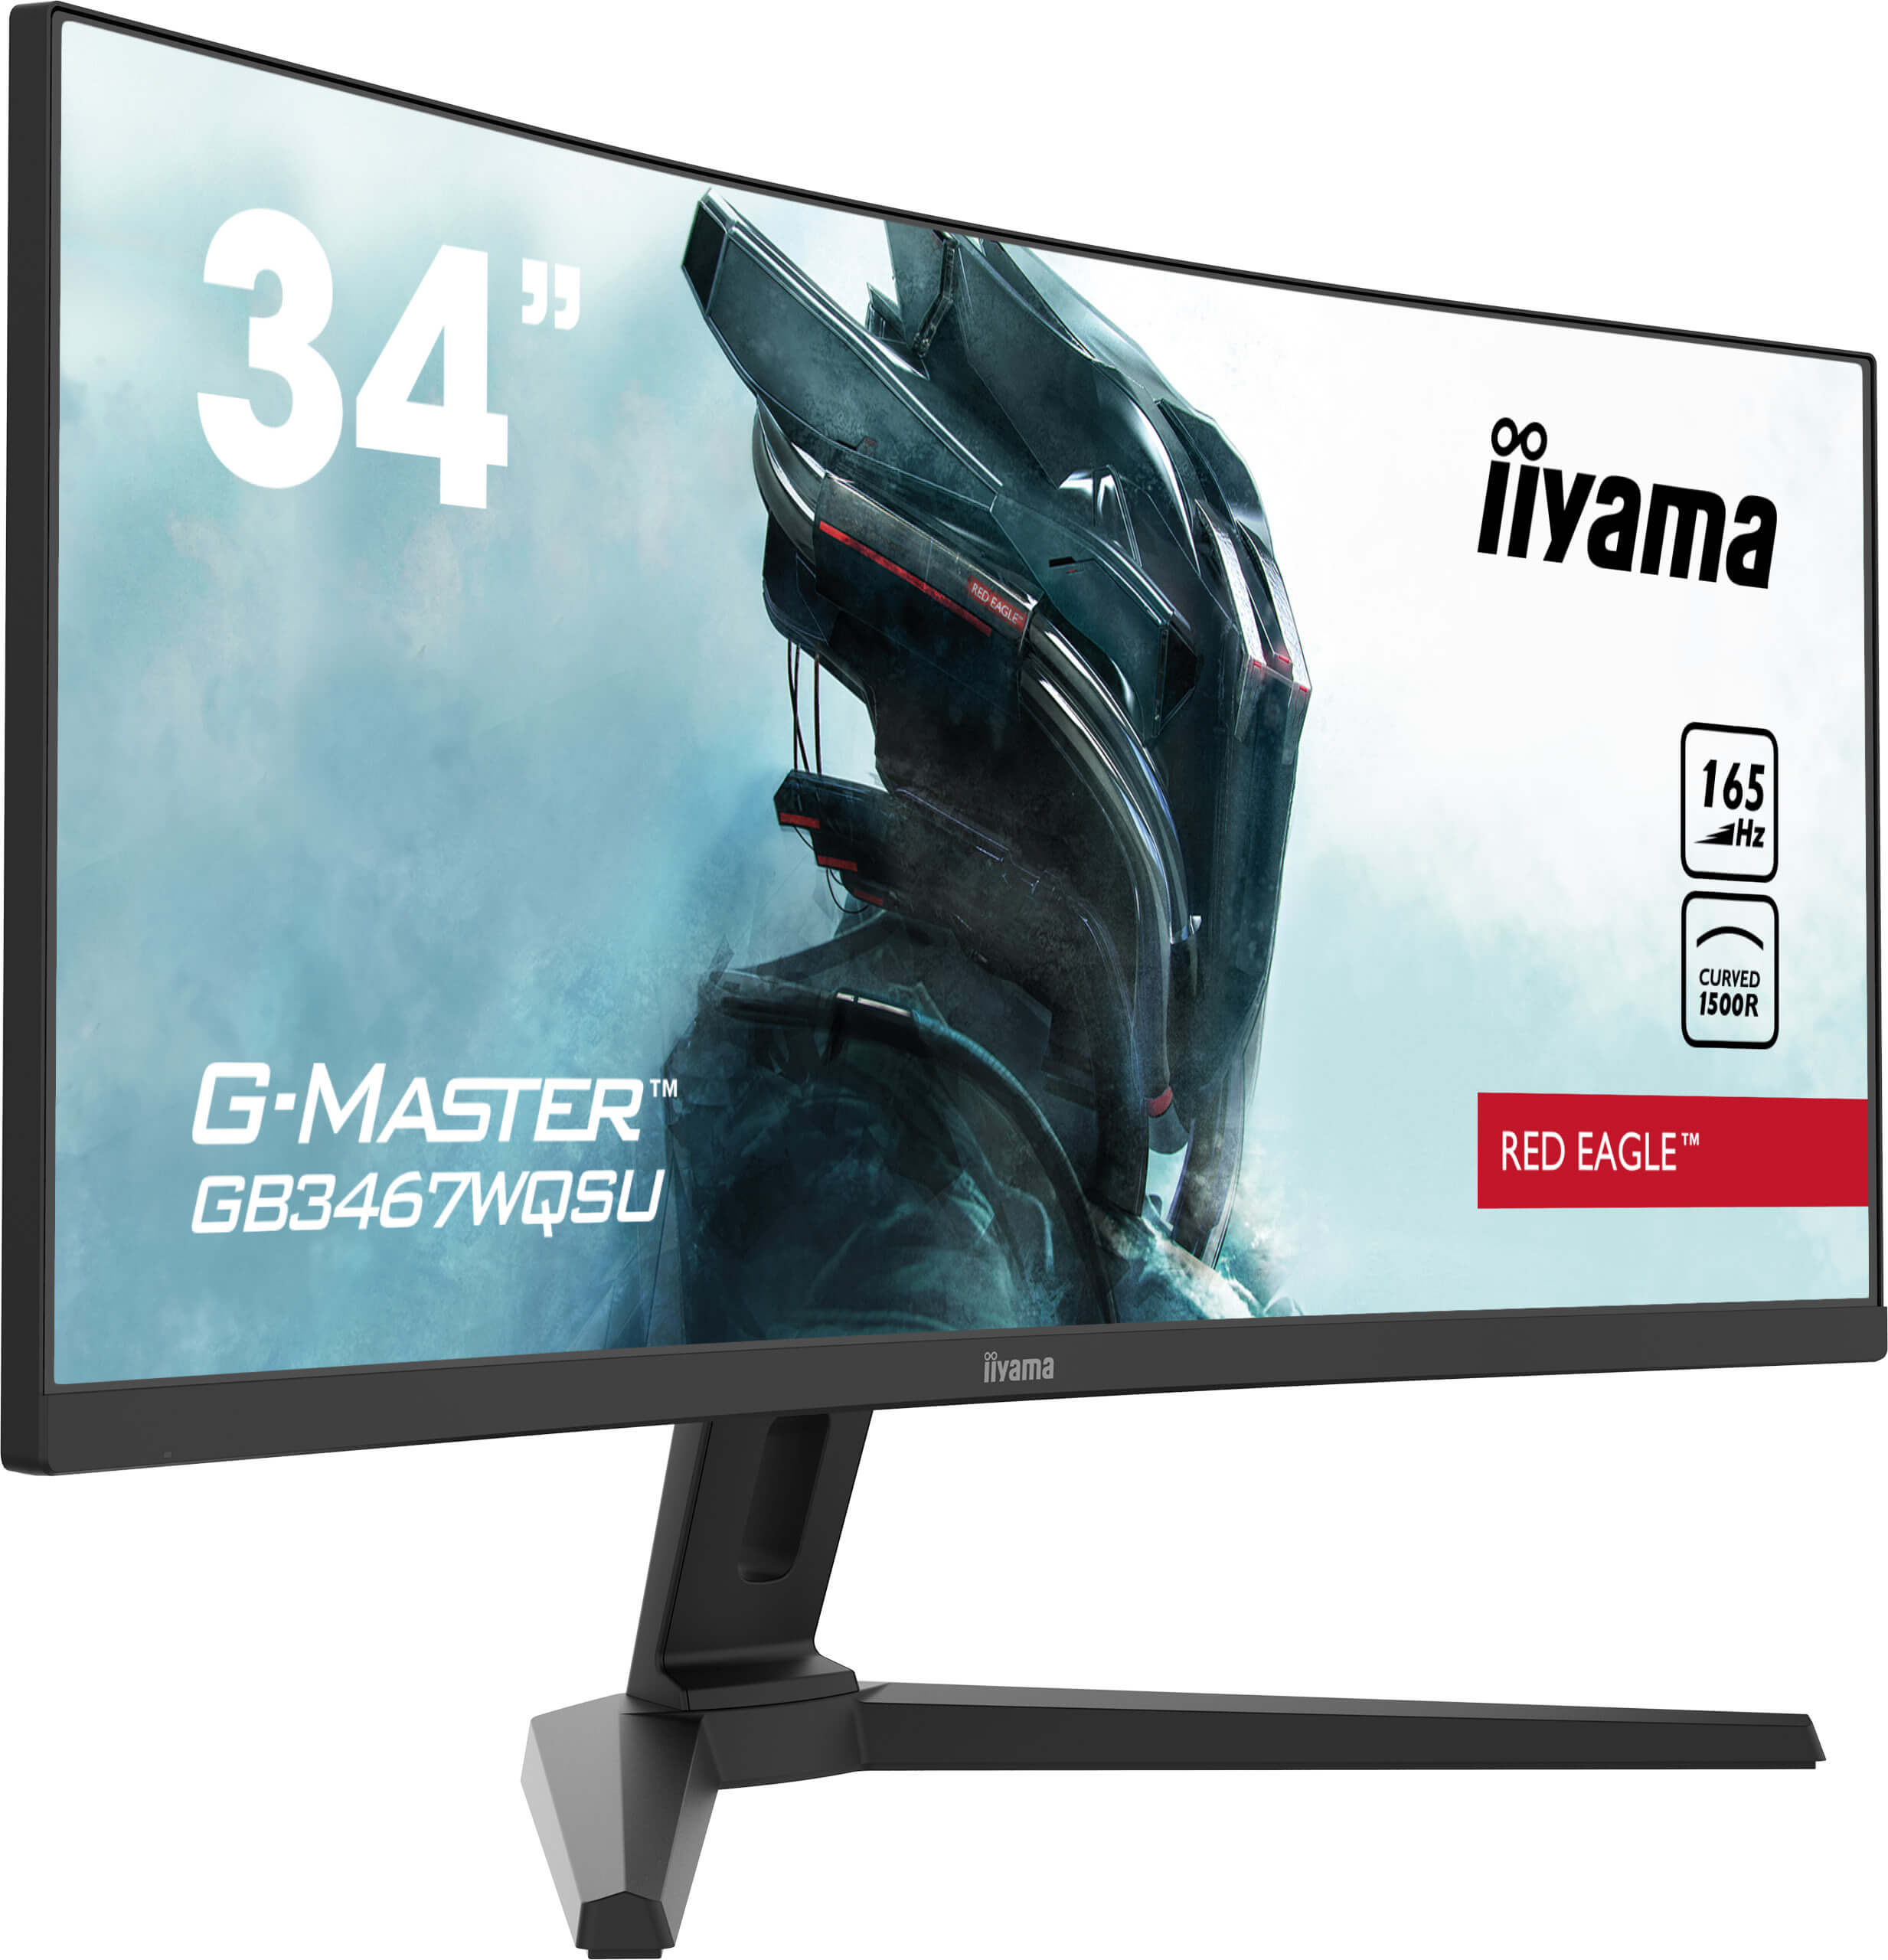 a stock image of the monitor showing all the main details including model number as well as the screen size.